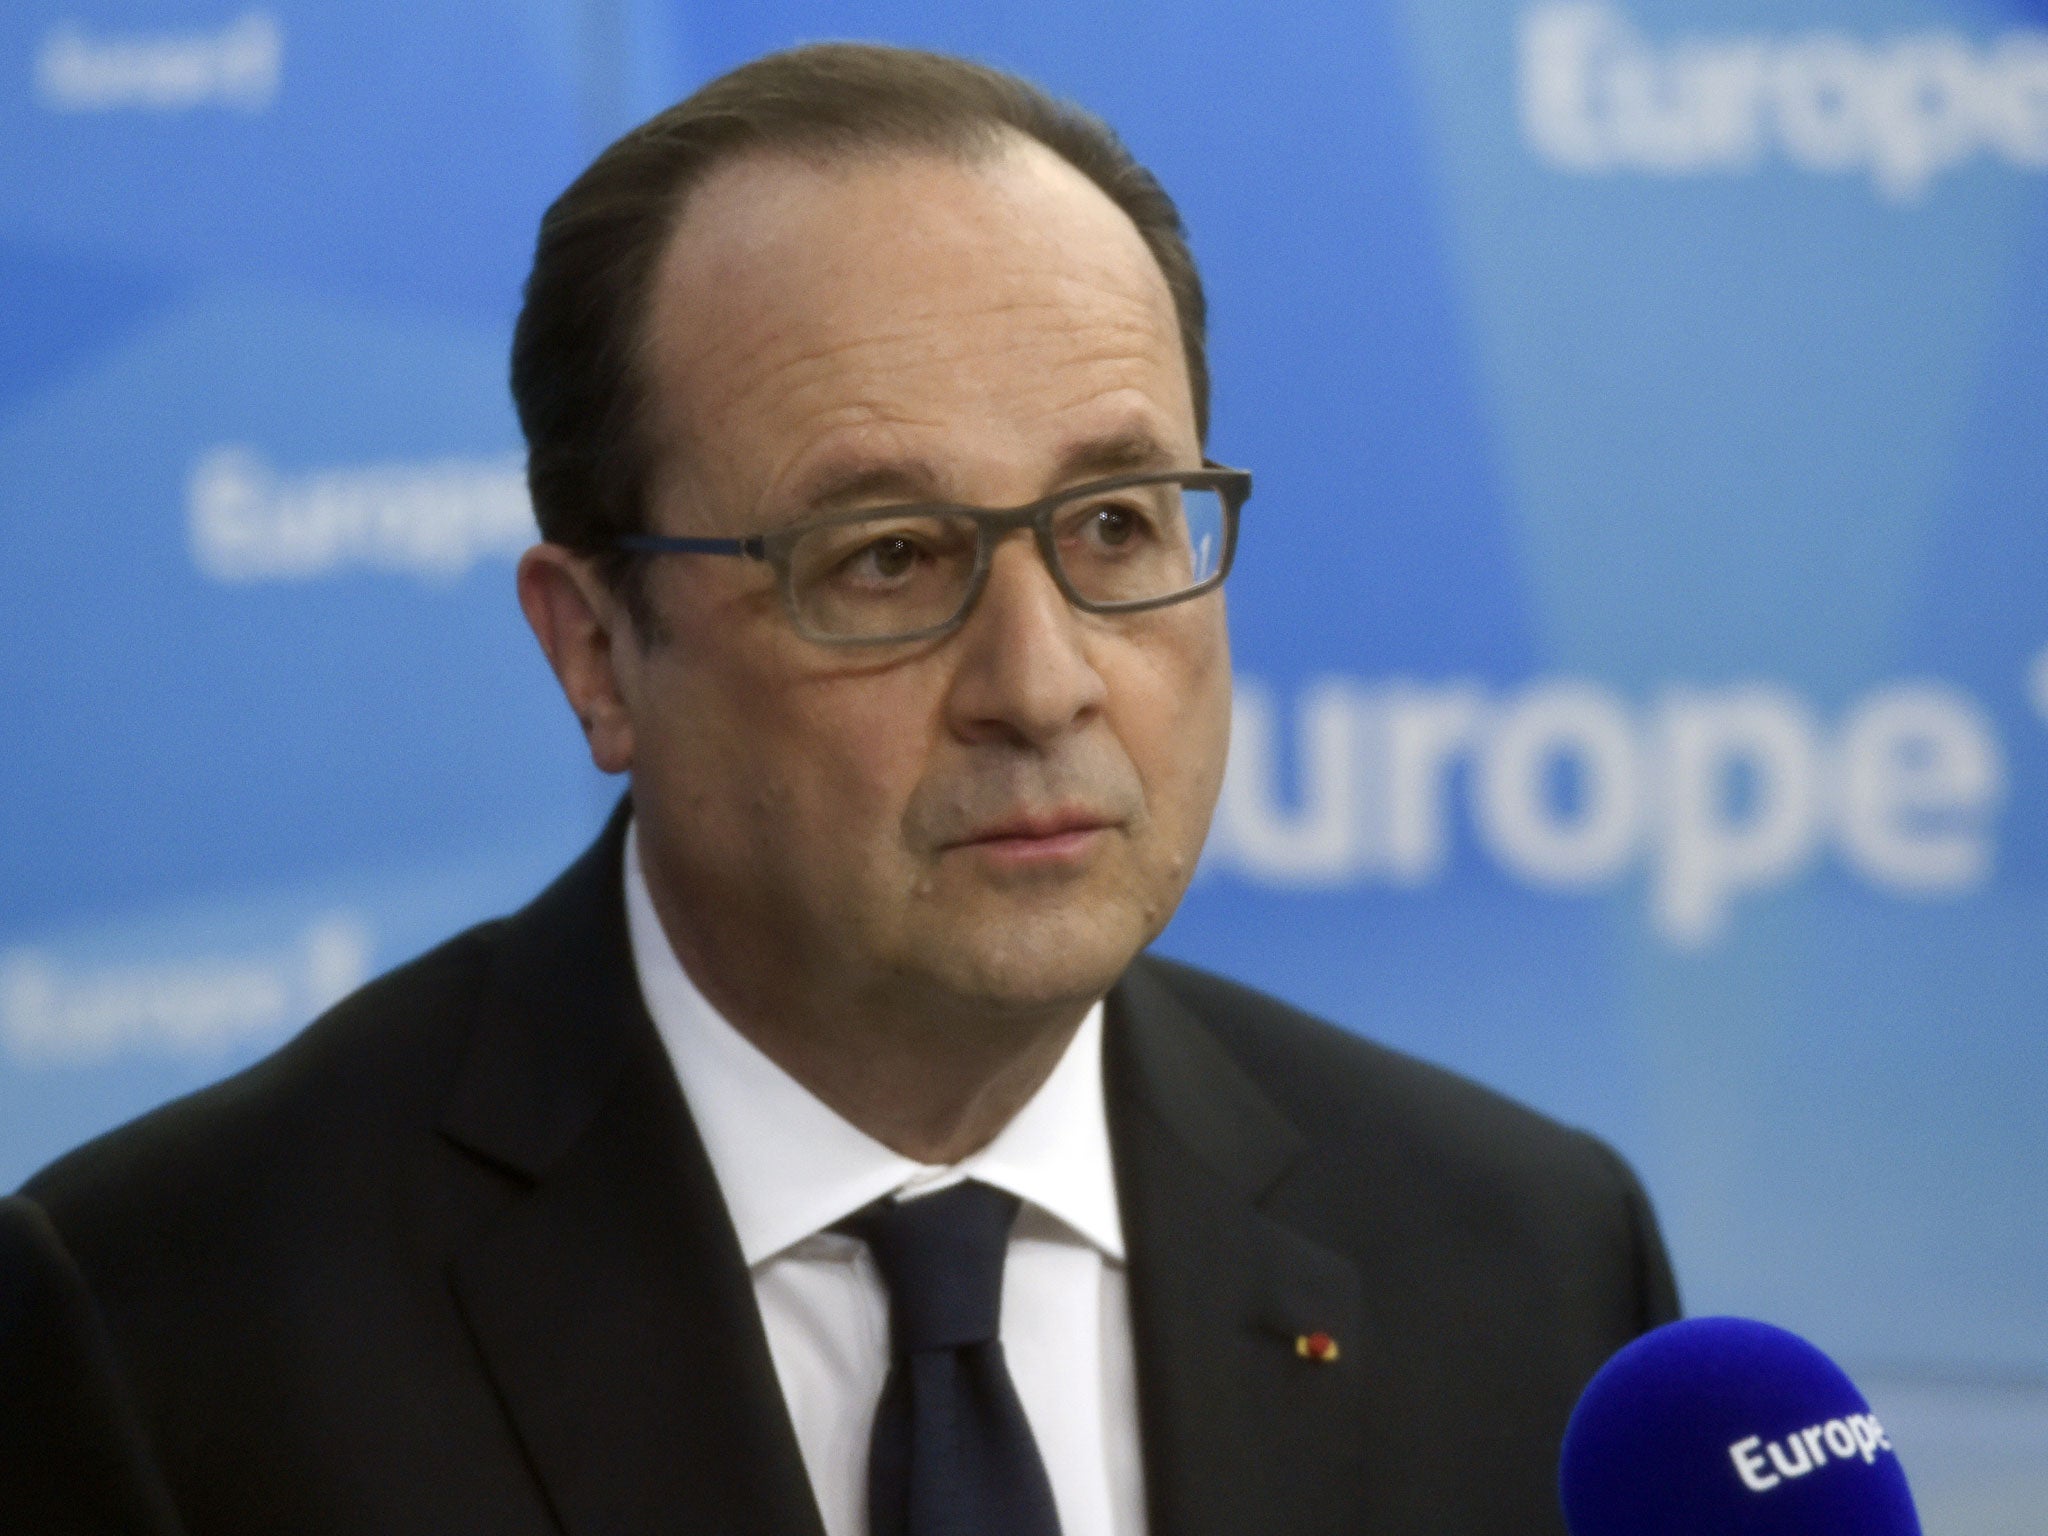 France's President Francois Hollande listens to a question during a morning radio show on France's Europe 1 station in Paris, France, May 17, 2016. REUTERS/Miguel Medina